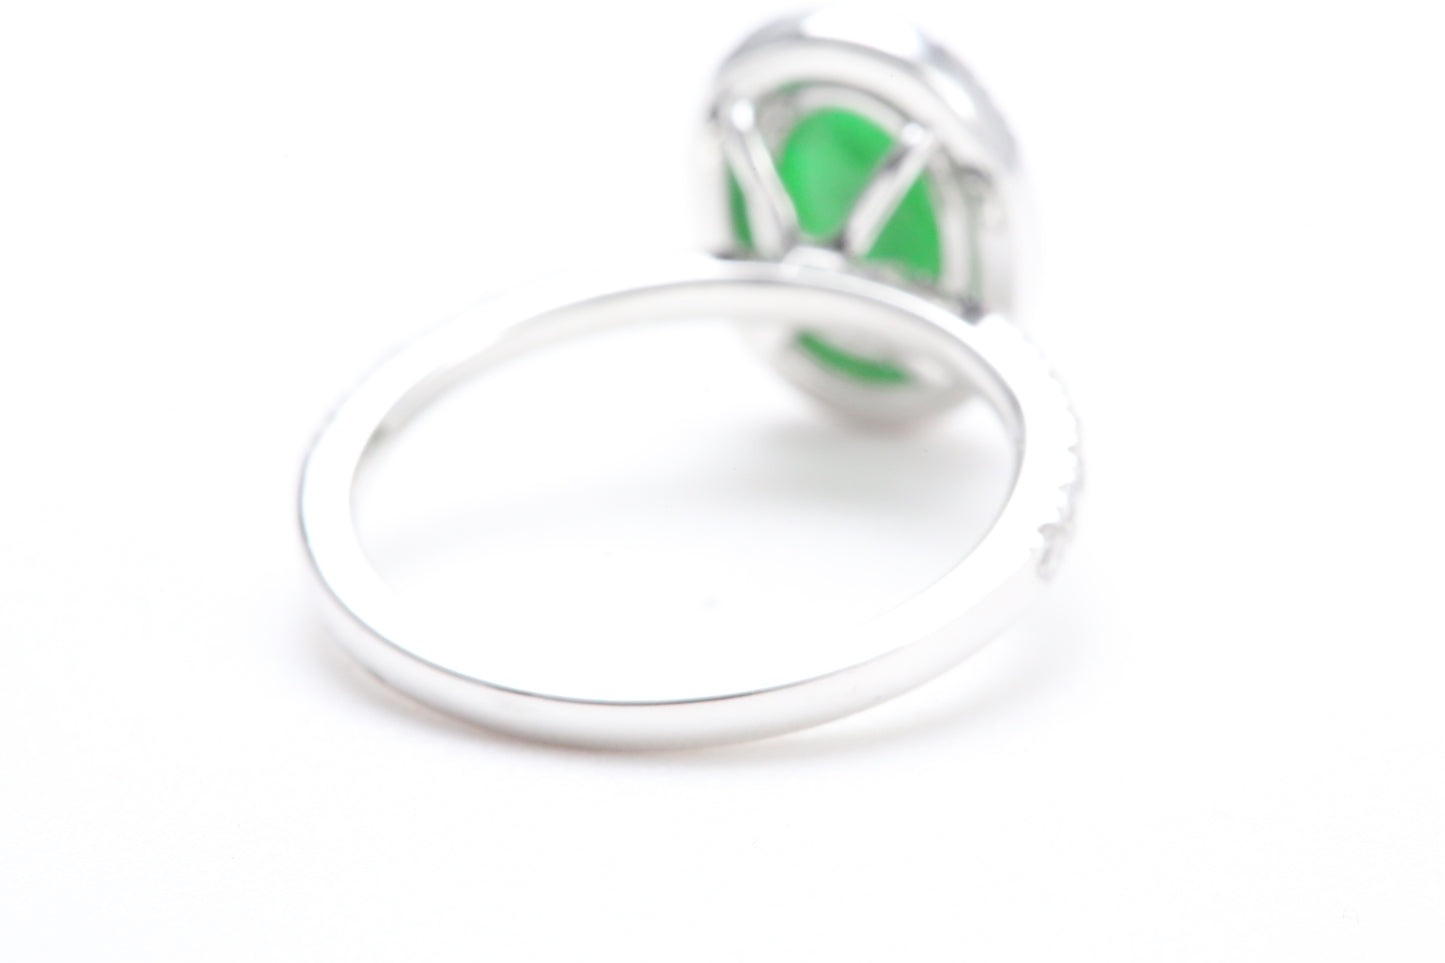 Load image into Gallery viewer, Oval Jadeite and Diamond Halo Ring
